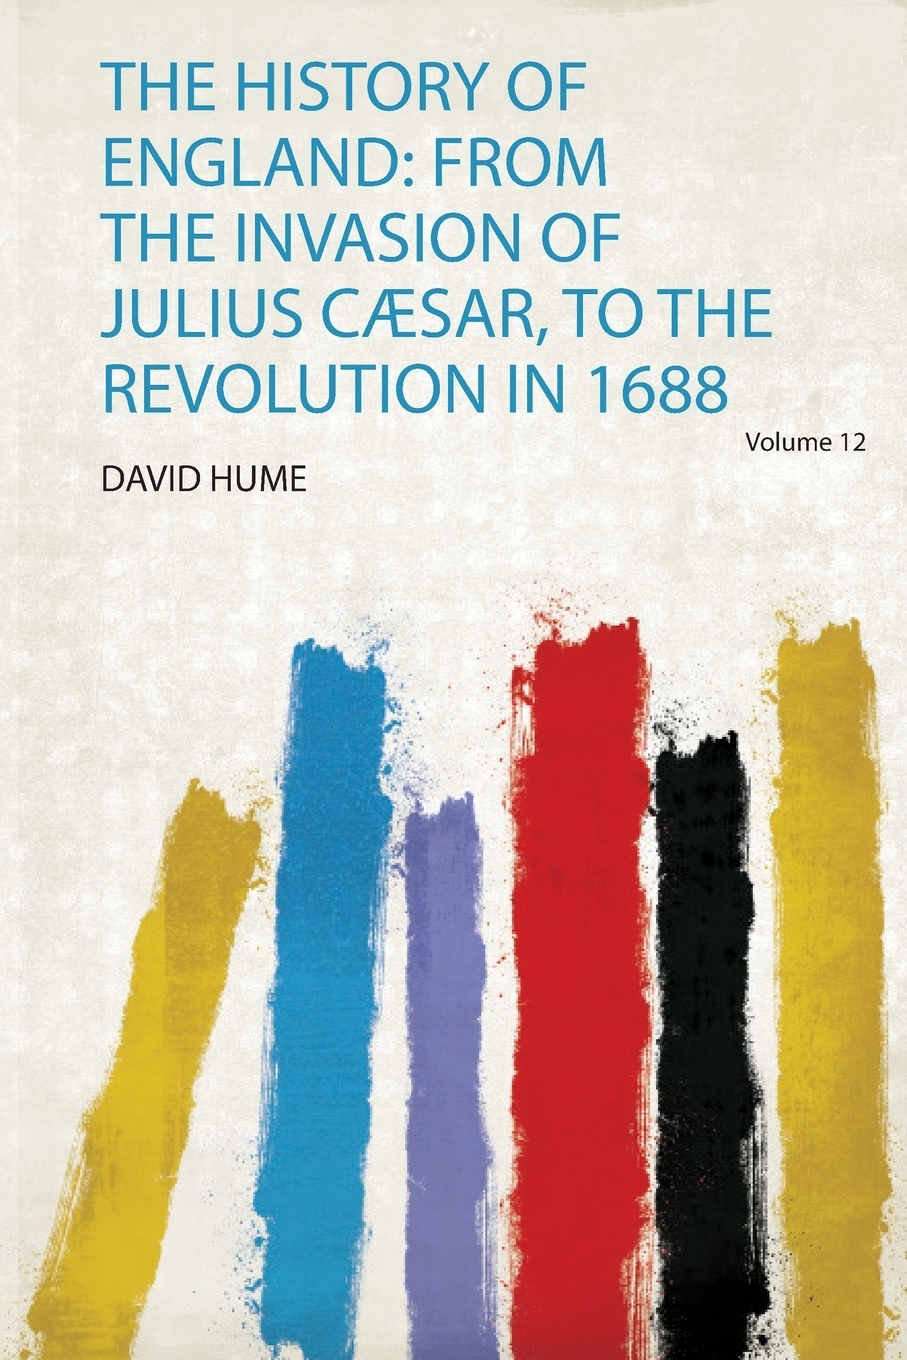 The History of England. from the Invasion of Julius Caesar, to the Revolution in 1688